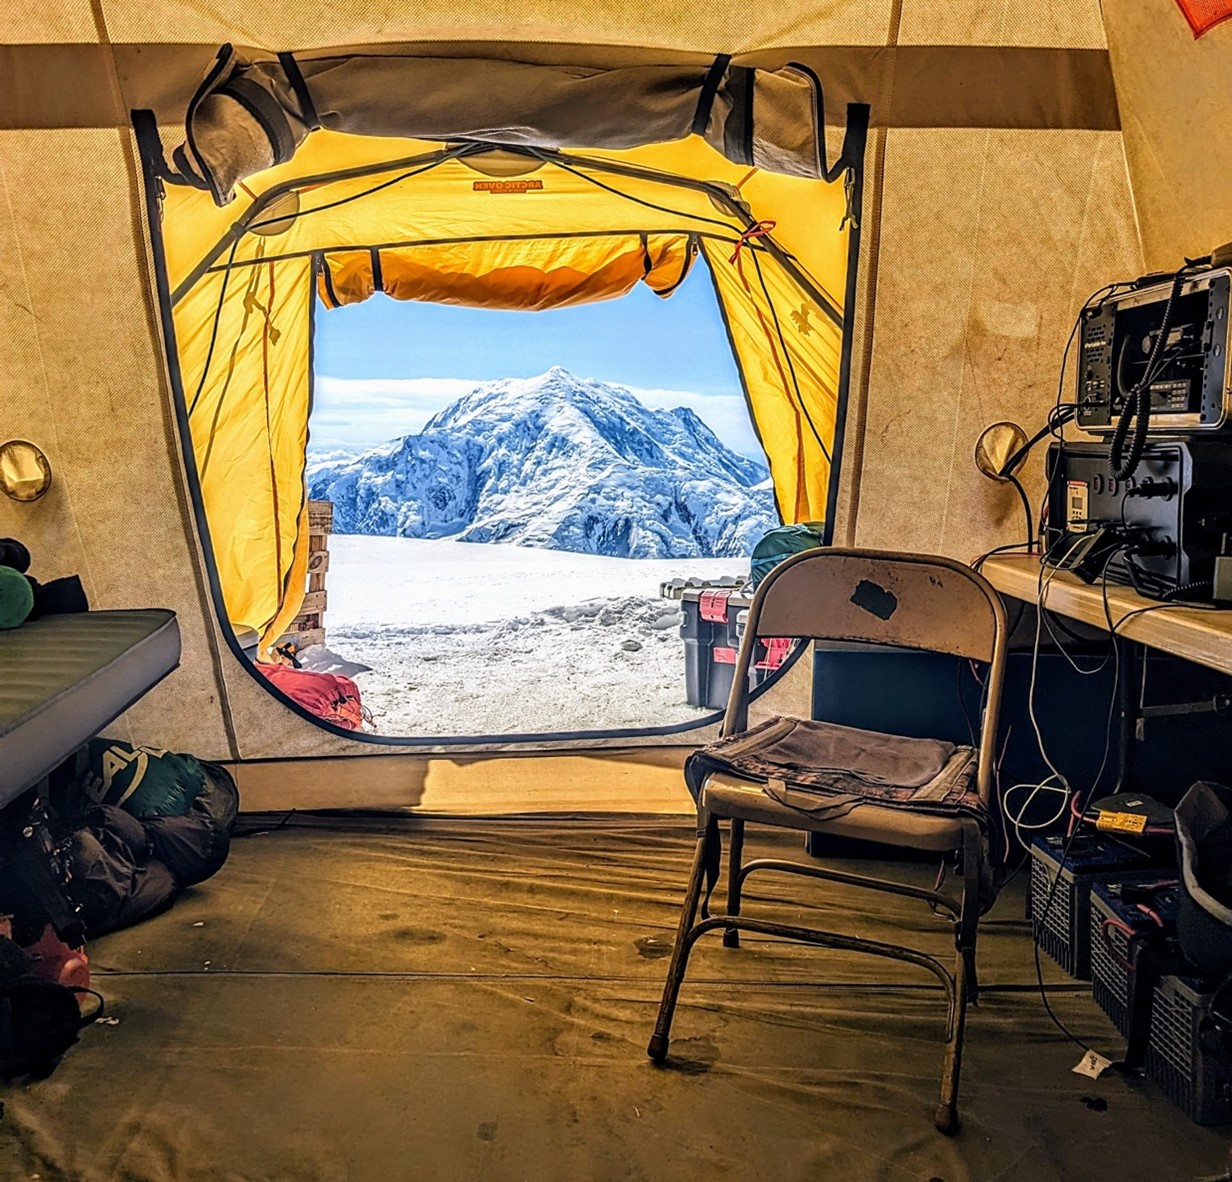 View looking out a yellow tent at a mountain in the distance. A metal folding chair and a radio console sits inside the tent.